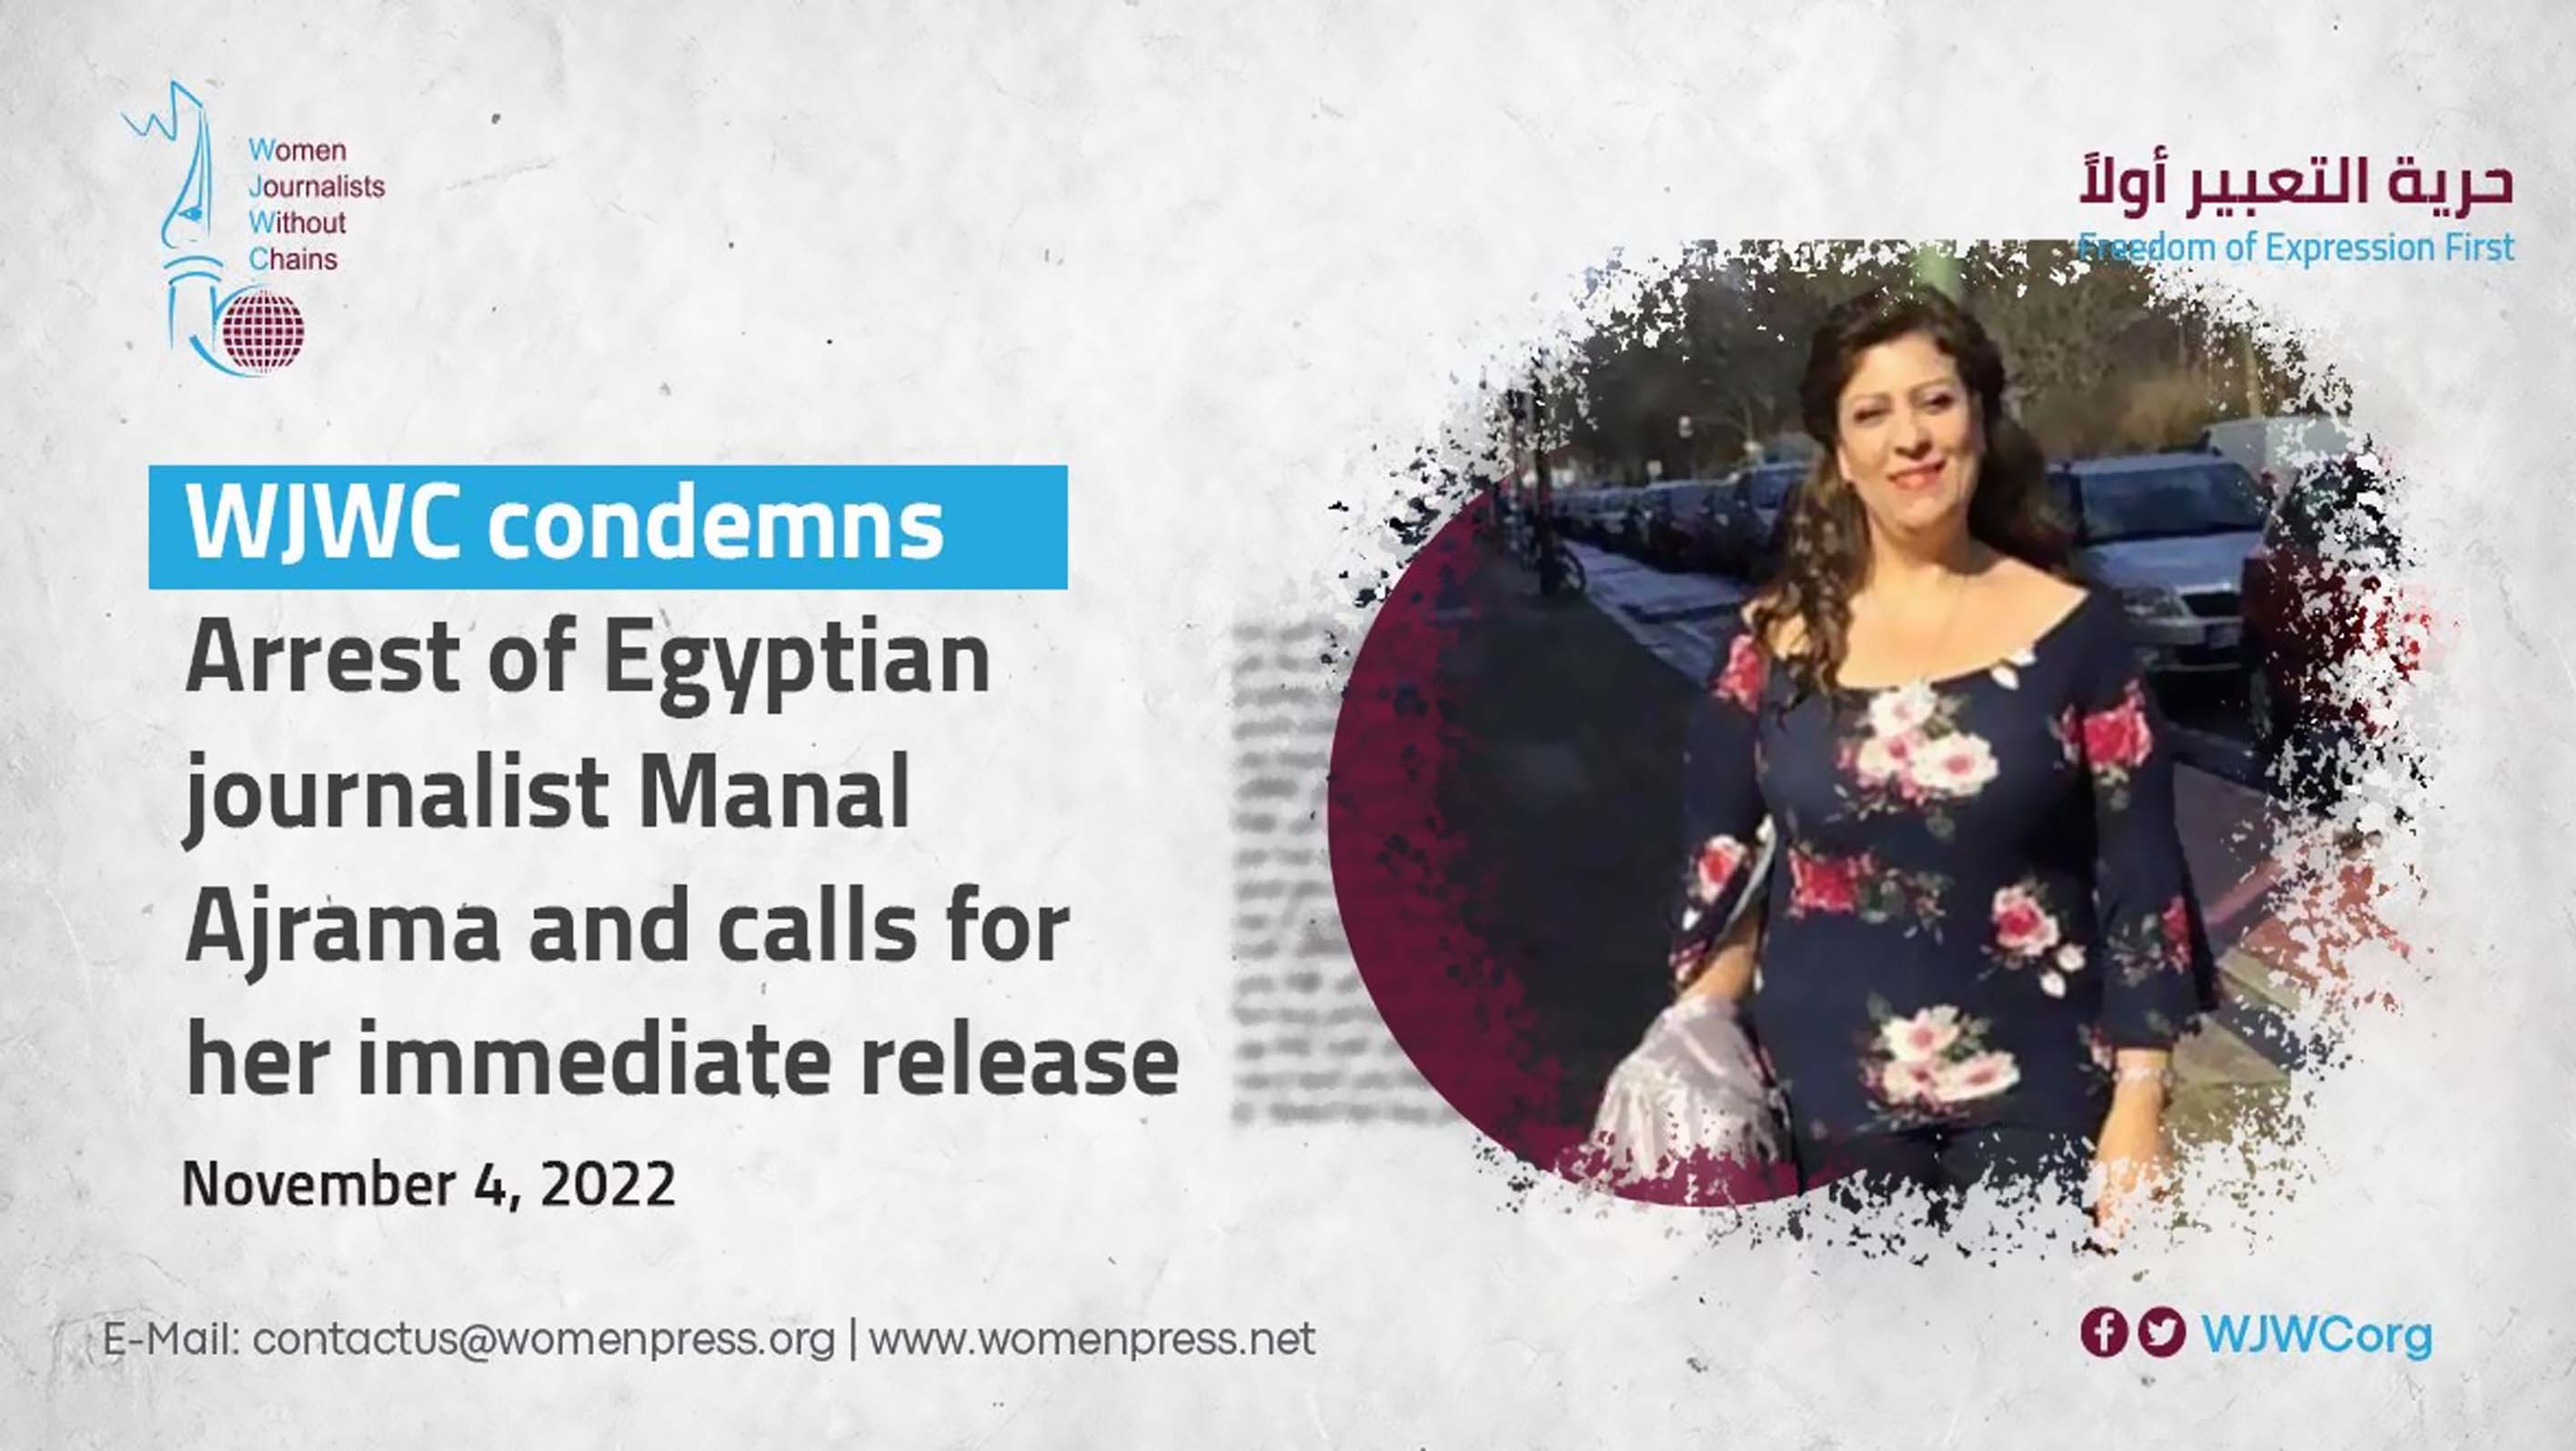 WJWC condemns arrest of Egyptian journalist Manal Ajrama and calls for her immediate release